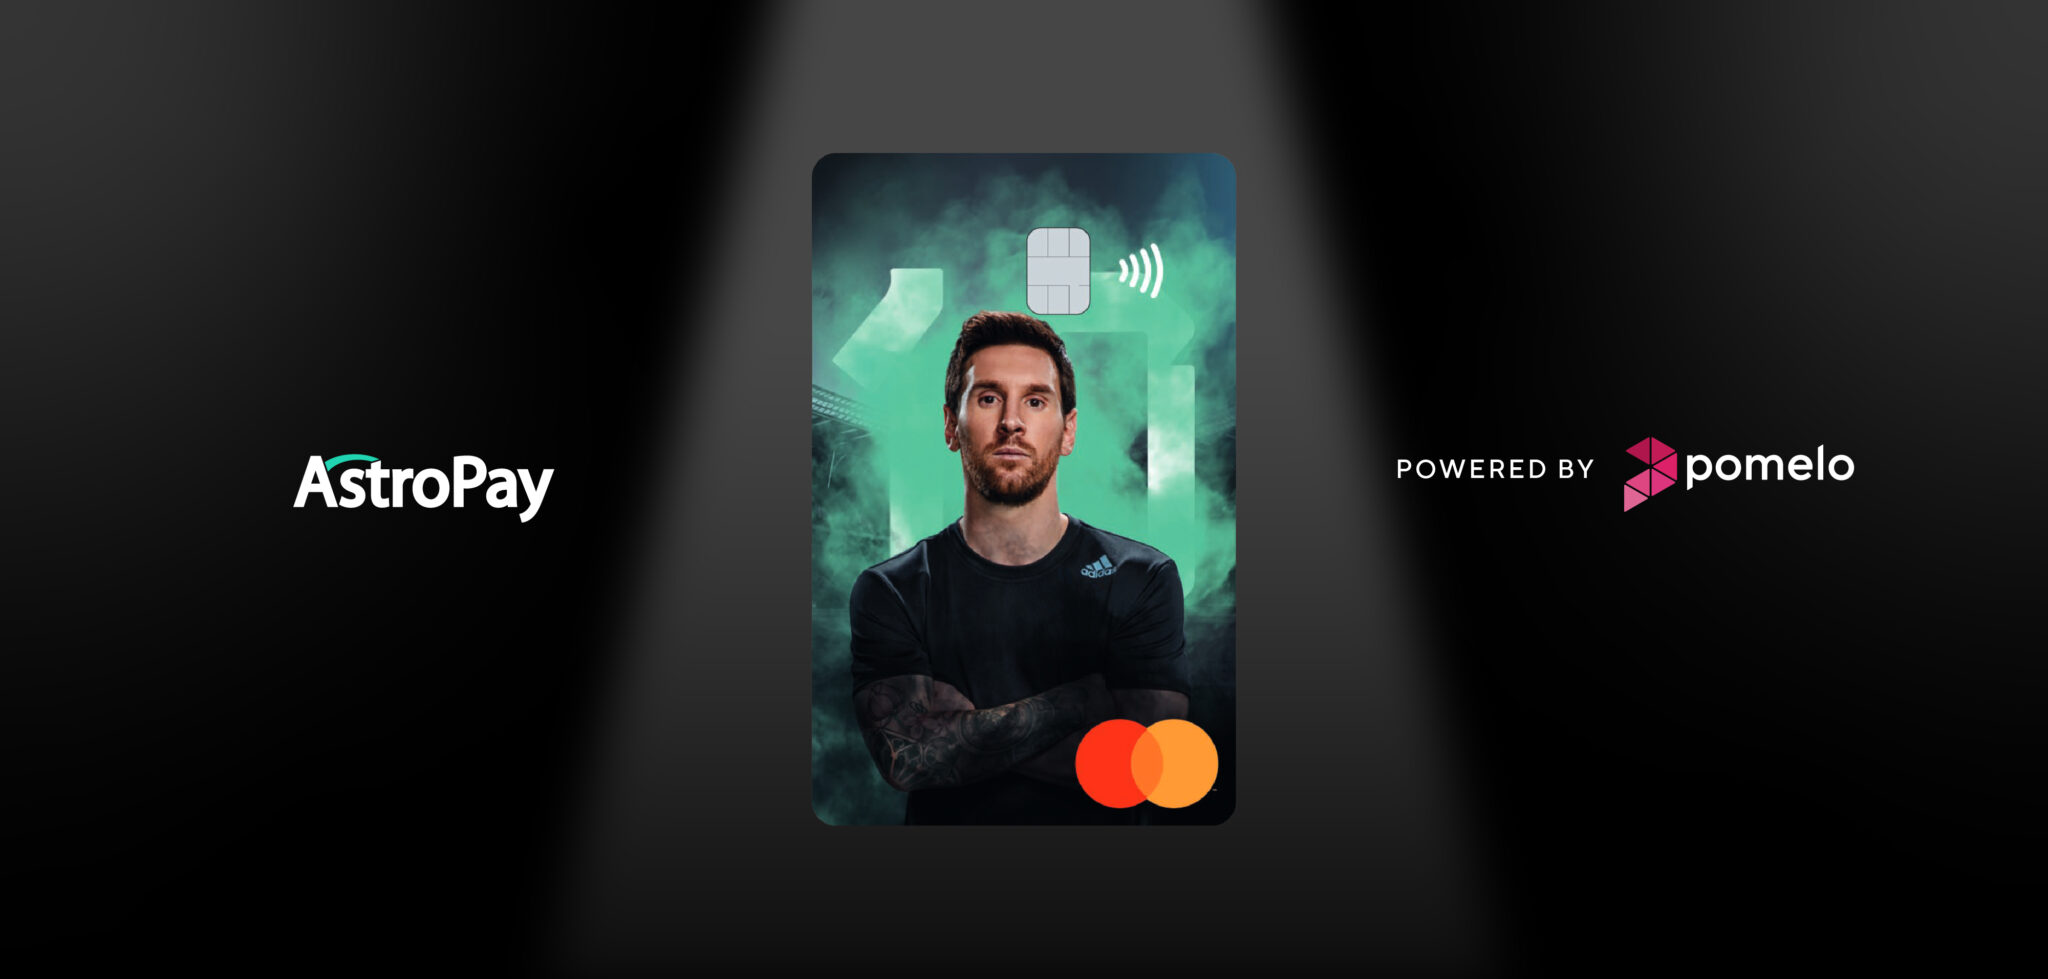 AstroPay Introduces Mastercard GOAT Card in Argentina Powered by Pomelo Technology